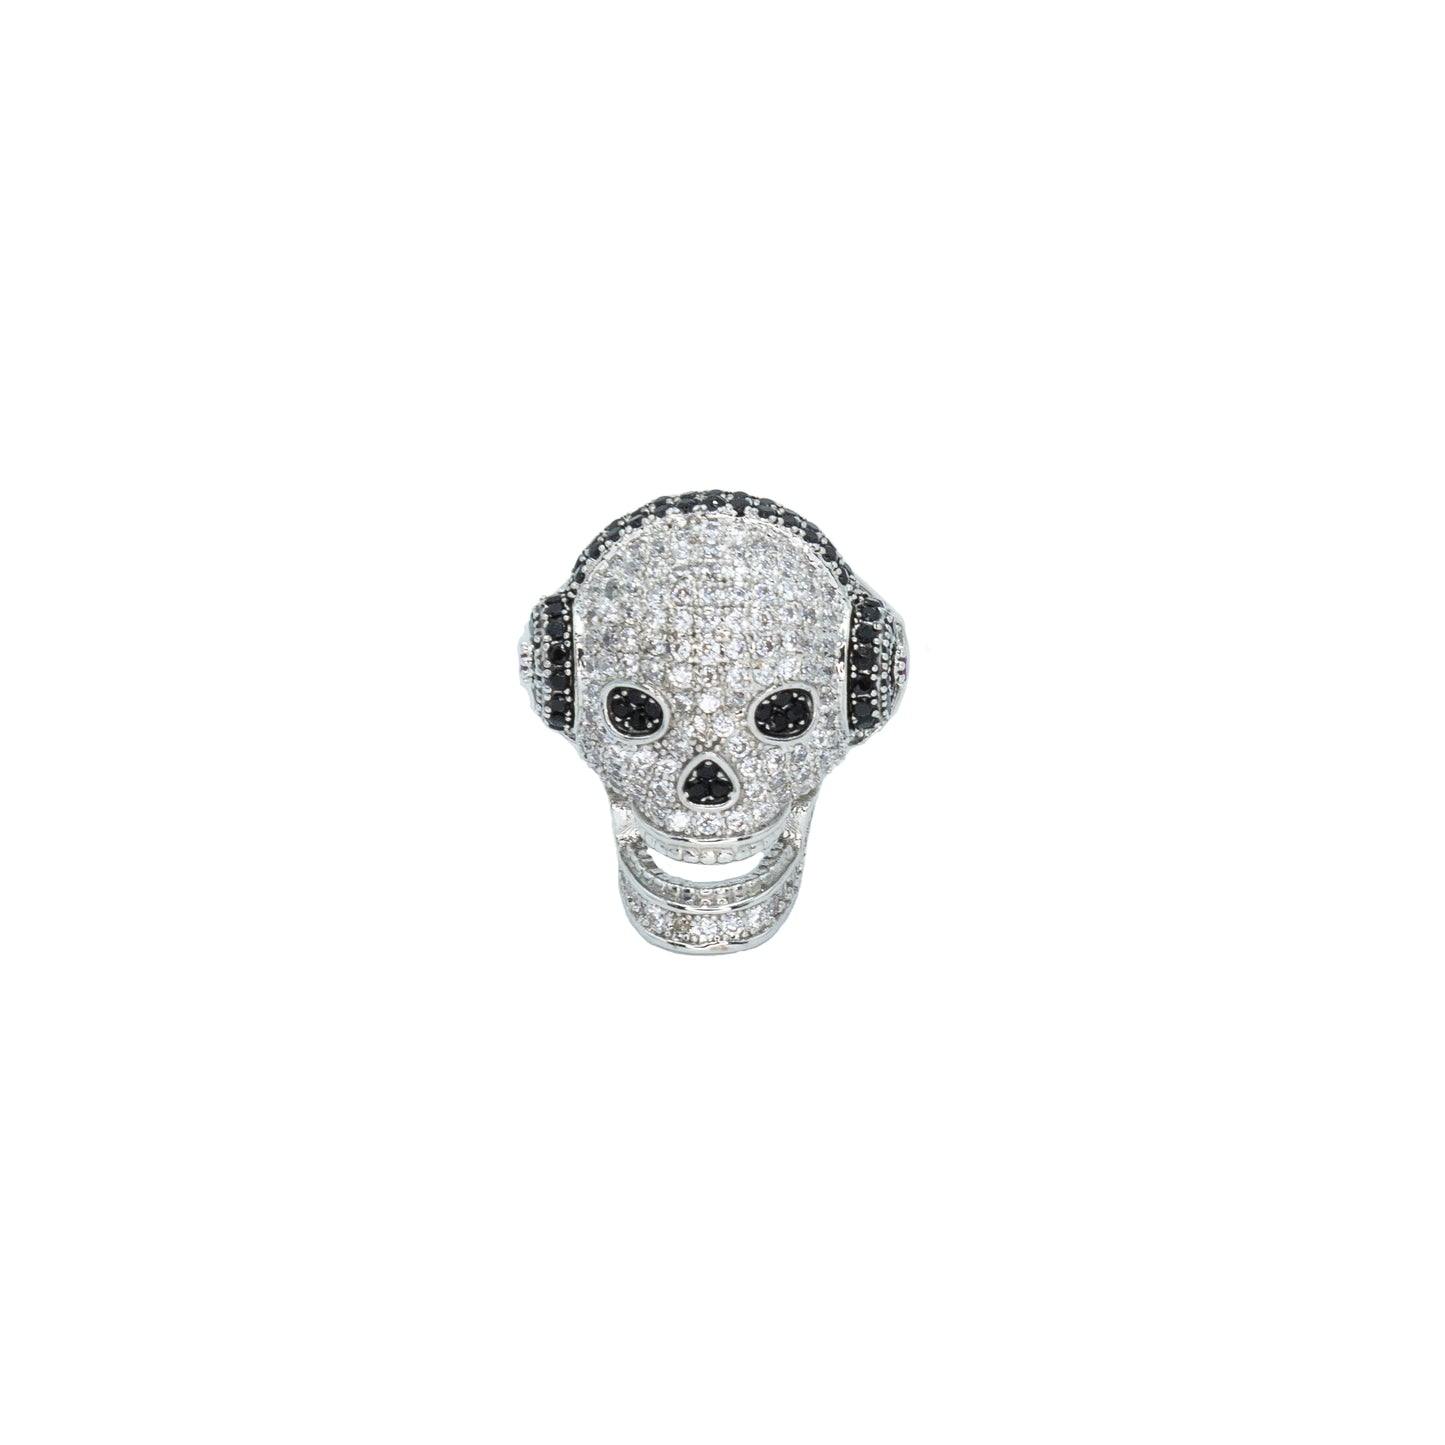 Headphone skull pave ring w/ 3A CZ stones rhodium plated